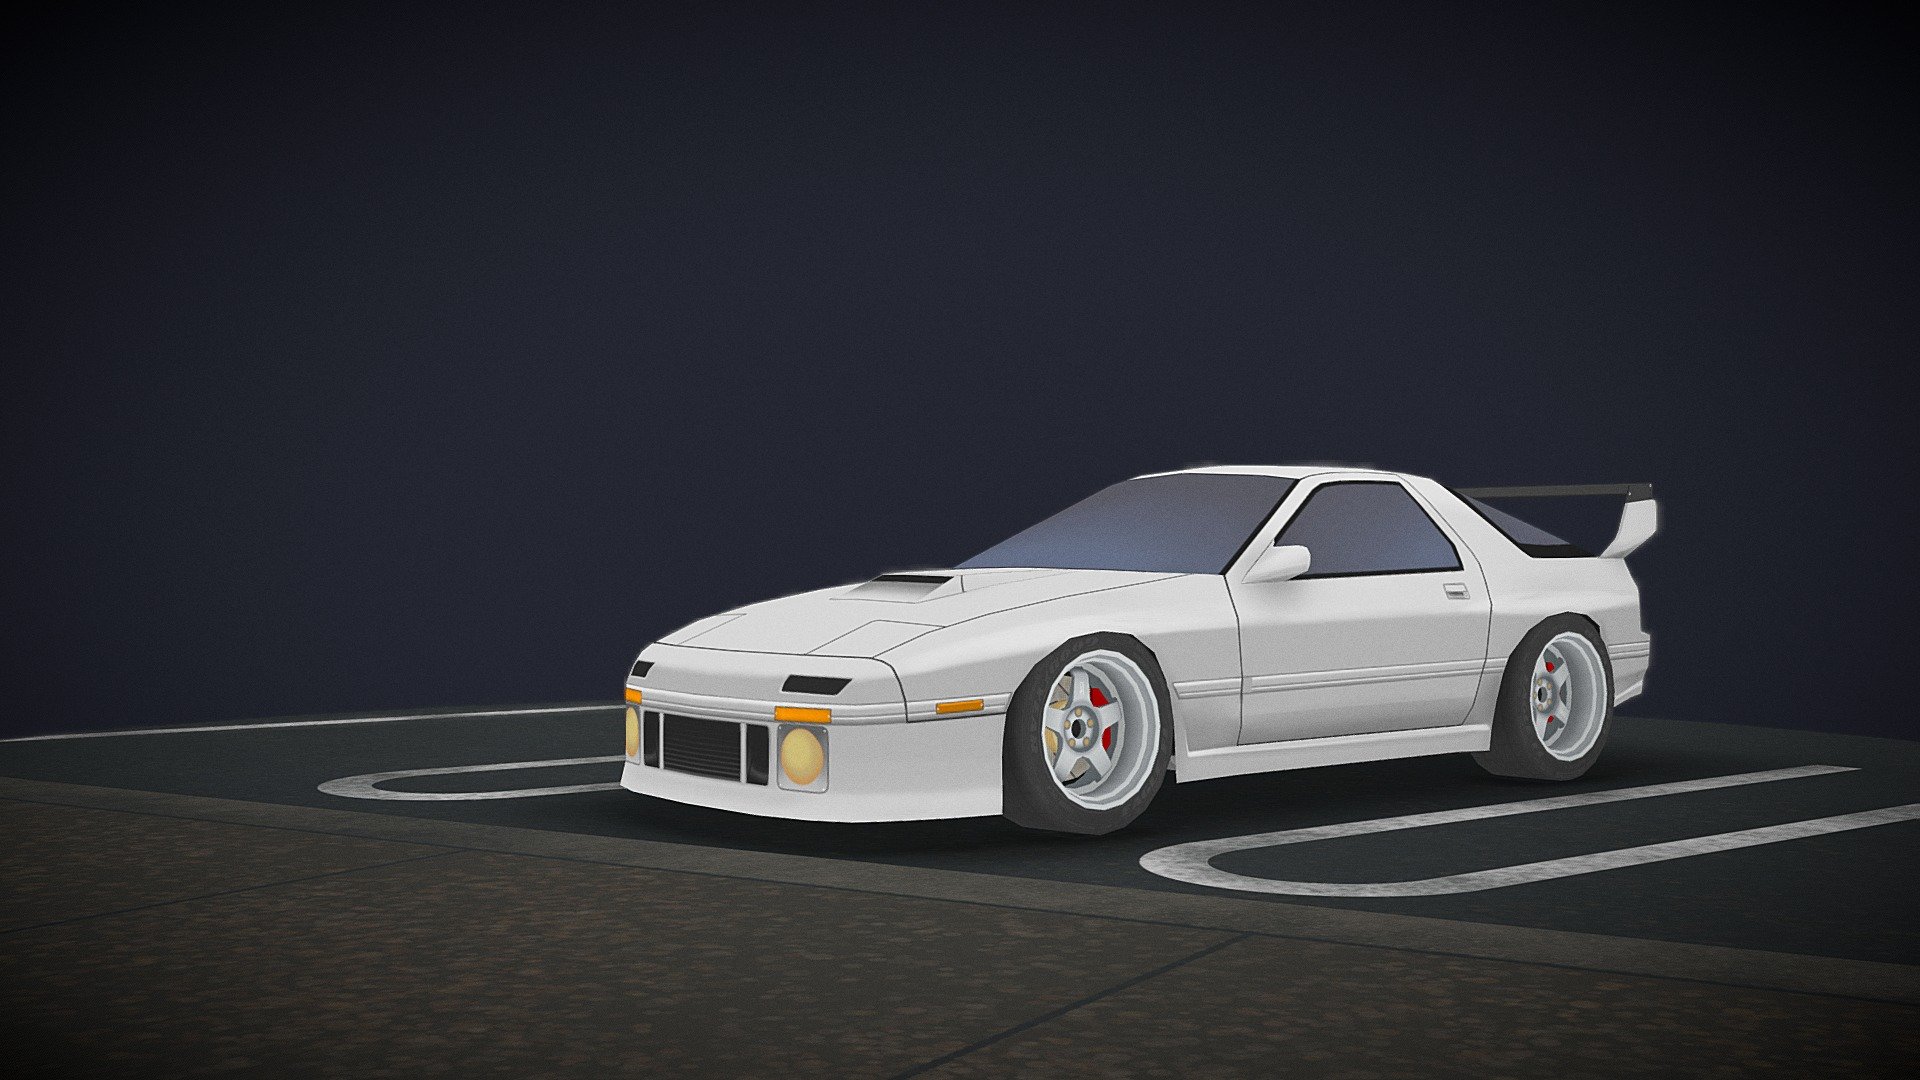 Stylized Mazda RX-7 FC3S  inspired by the Wangan street racers/tuners of the '80s through the early '00s - RX-7 FC Shutoko Spec - 3D model by nikki_st 3d model